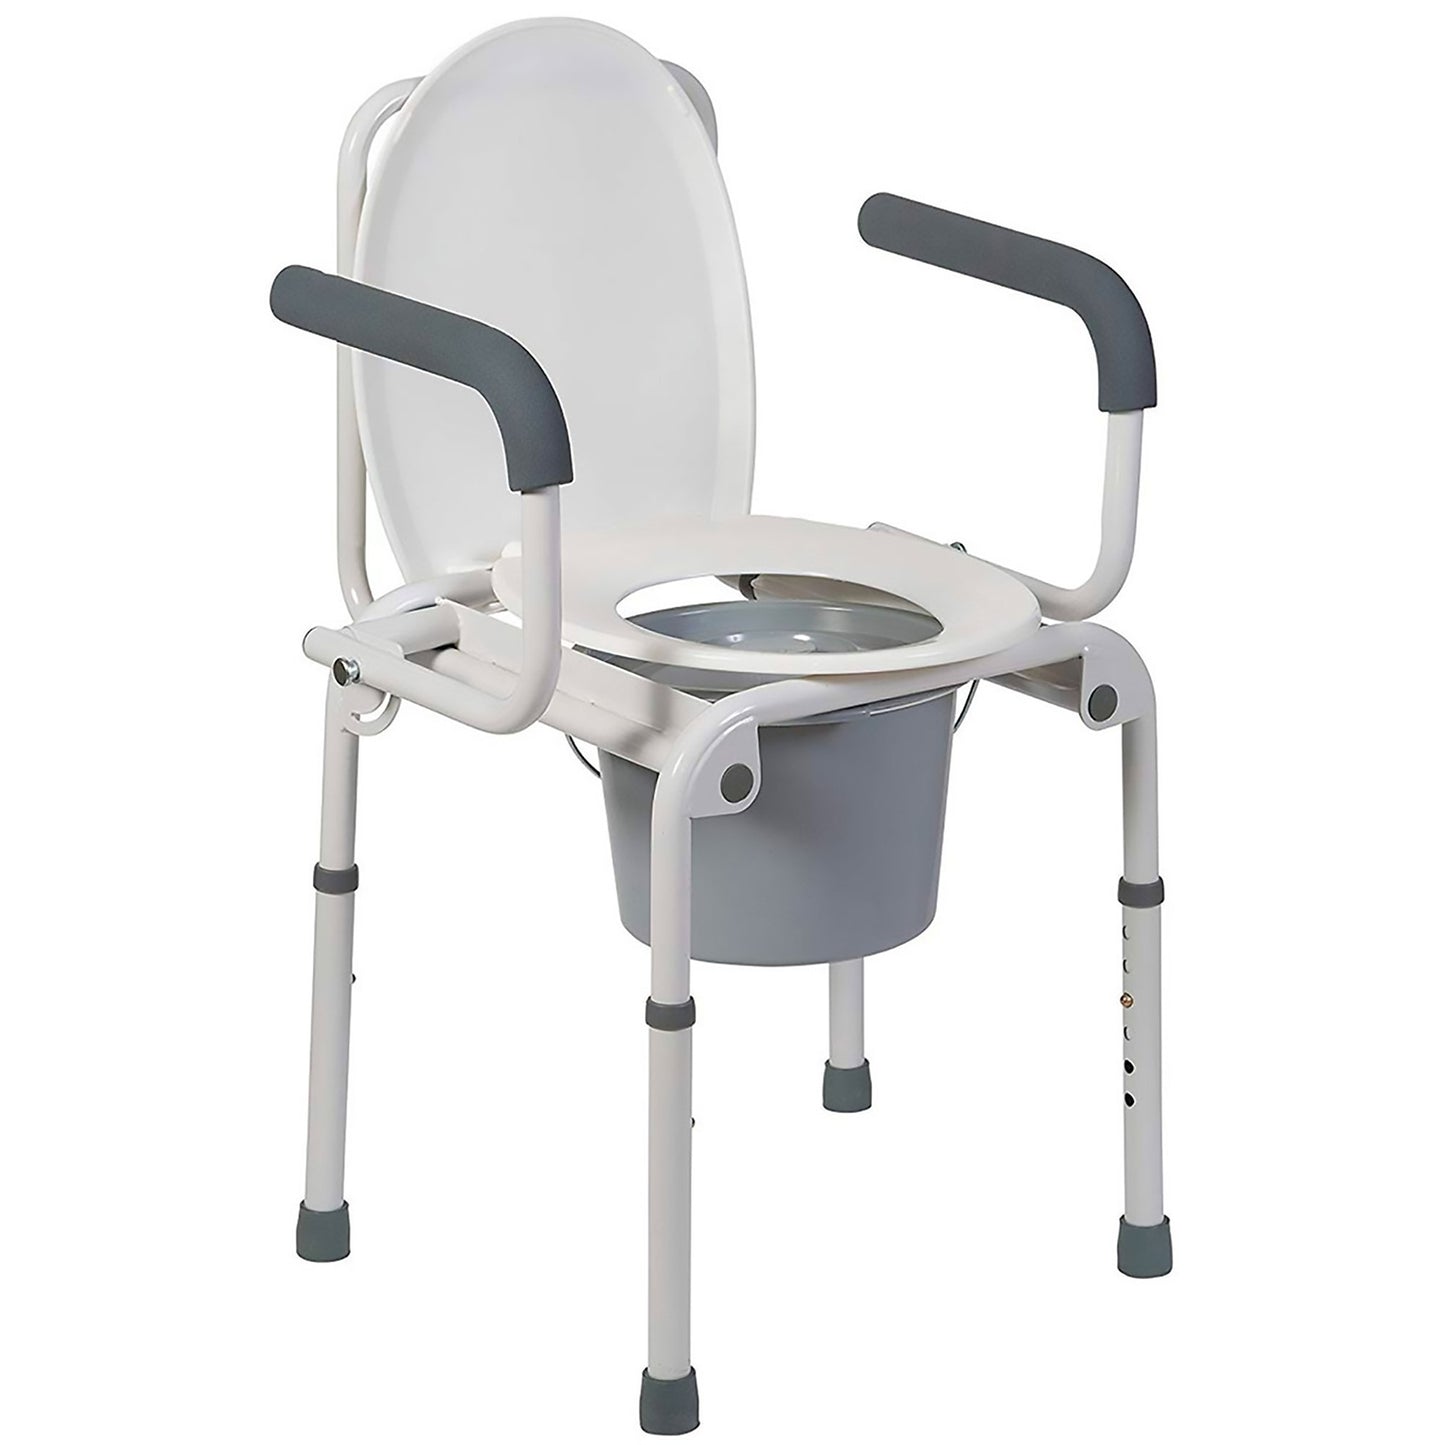 Mabis® Drop-Arm Steel Commode